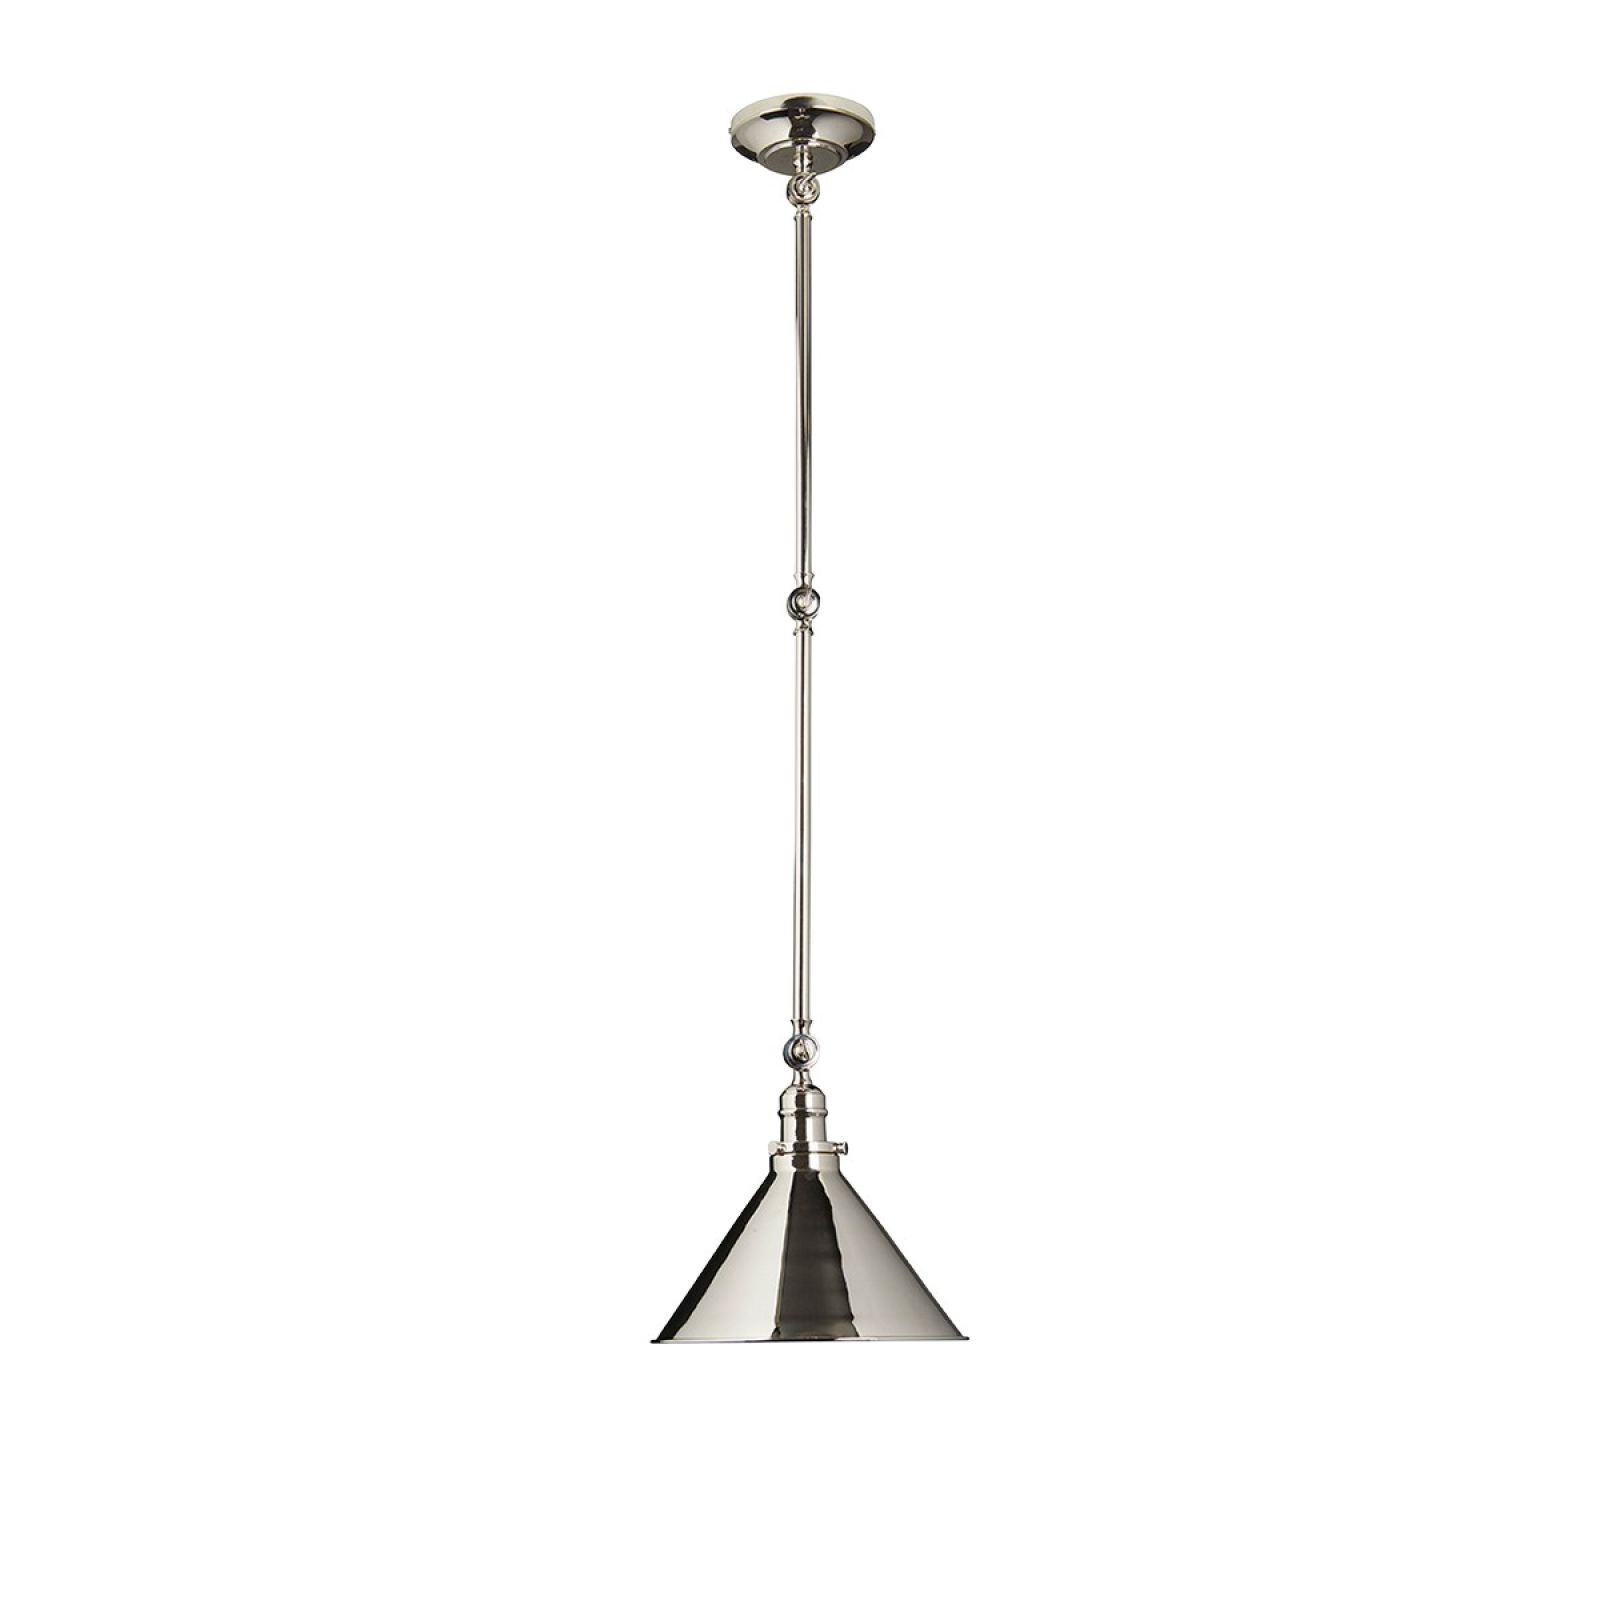 Provence large wall light/pendant light in Polished Nickel